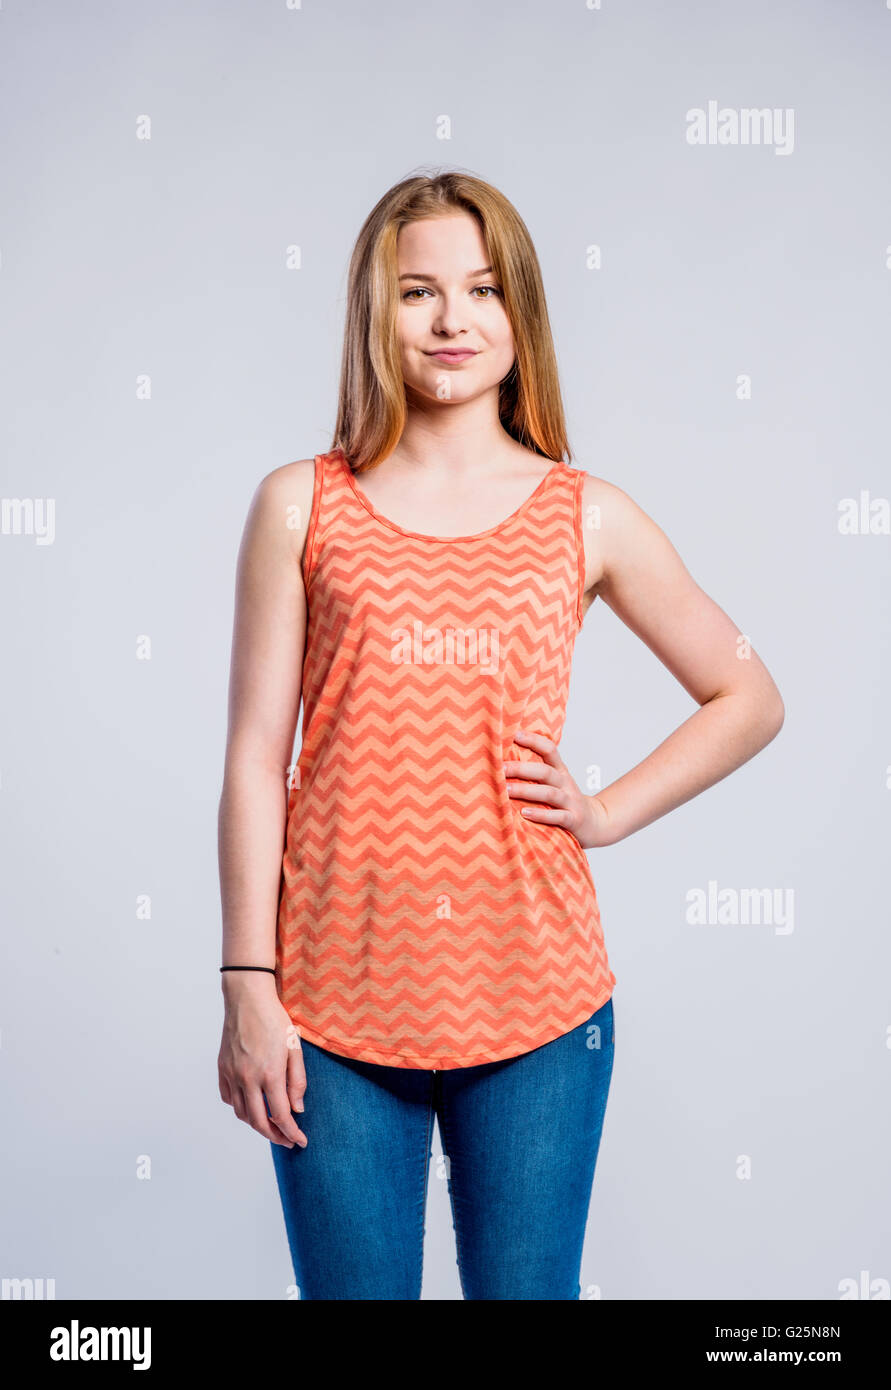 Girl in jeans and singlet, young woman, studio shot Stock Photo - Alamy